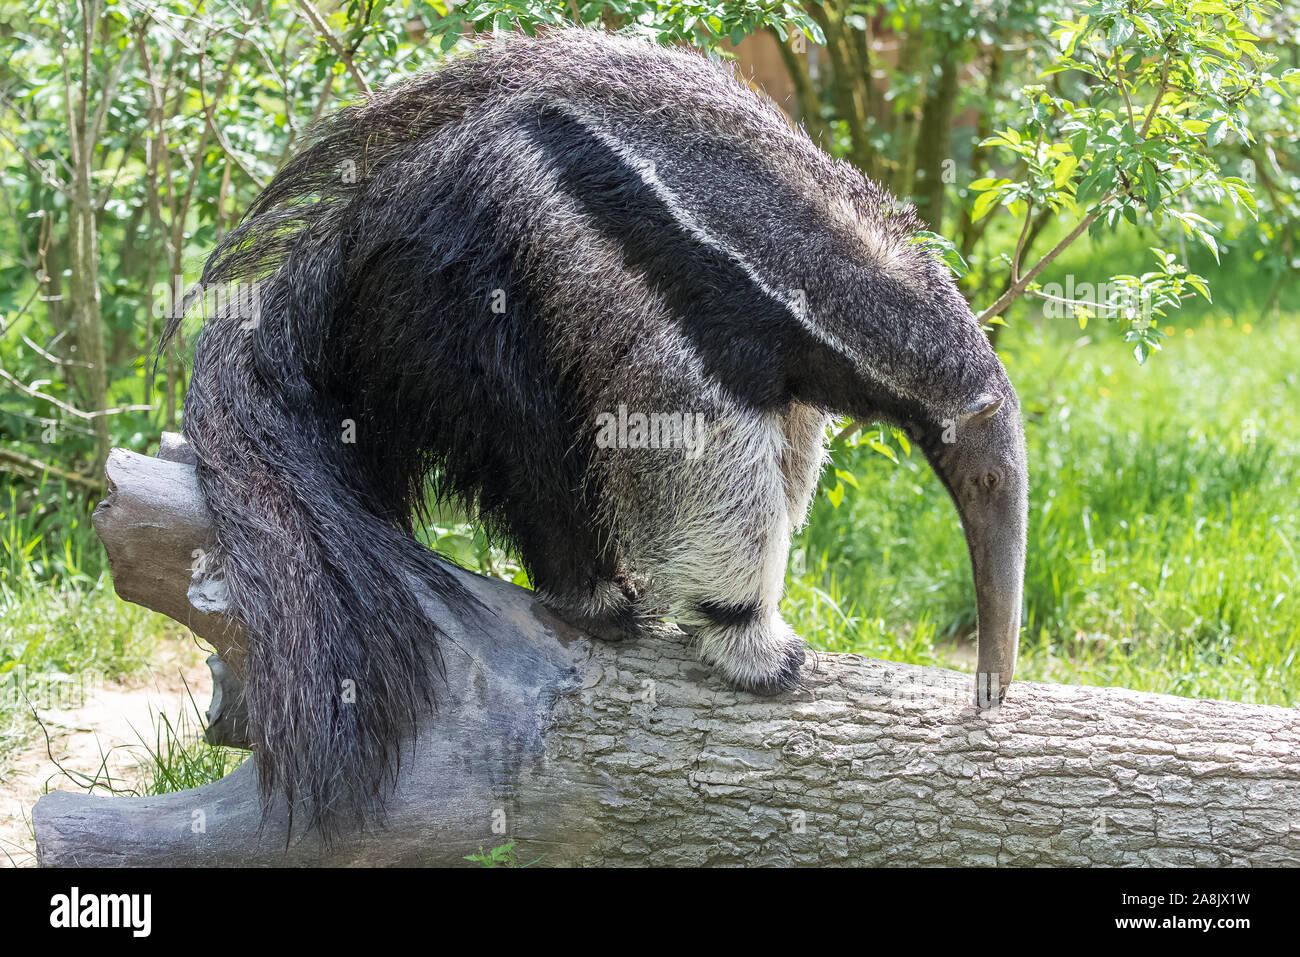 Giant Anteater, animal eating ants in a tree trunk Stock Photo